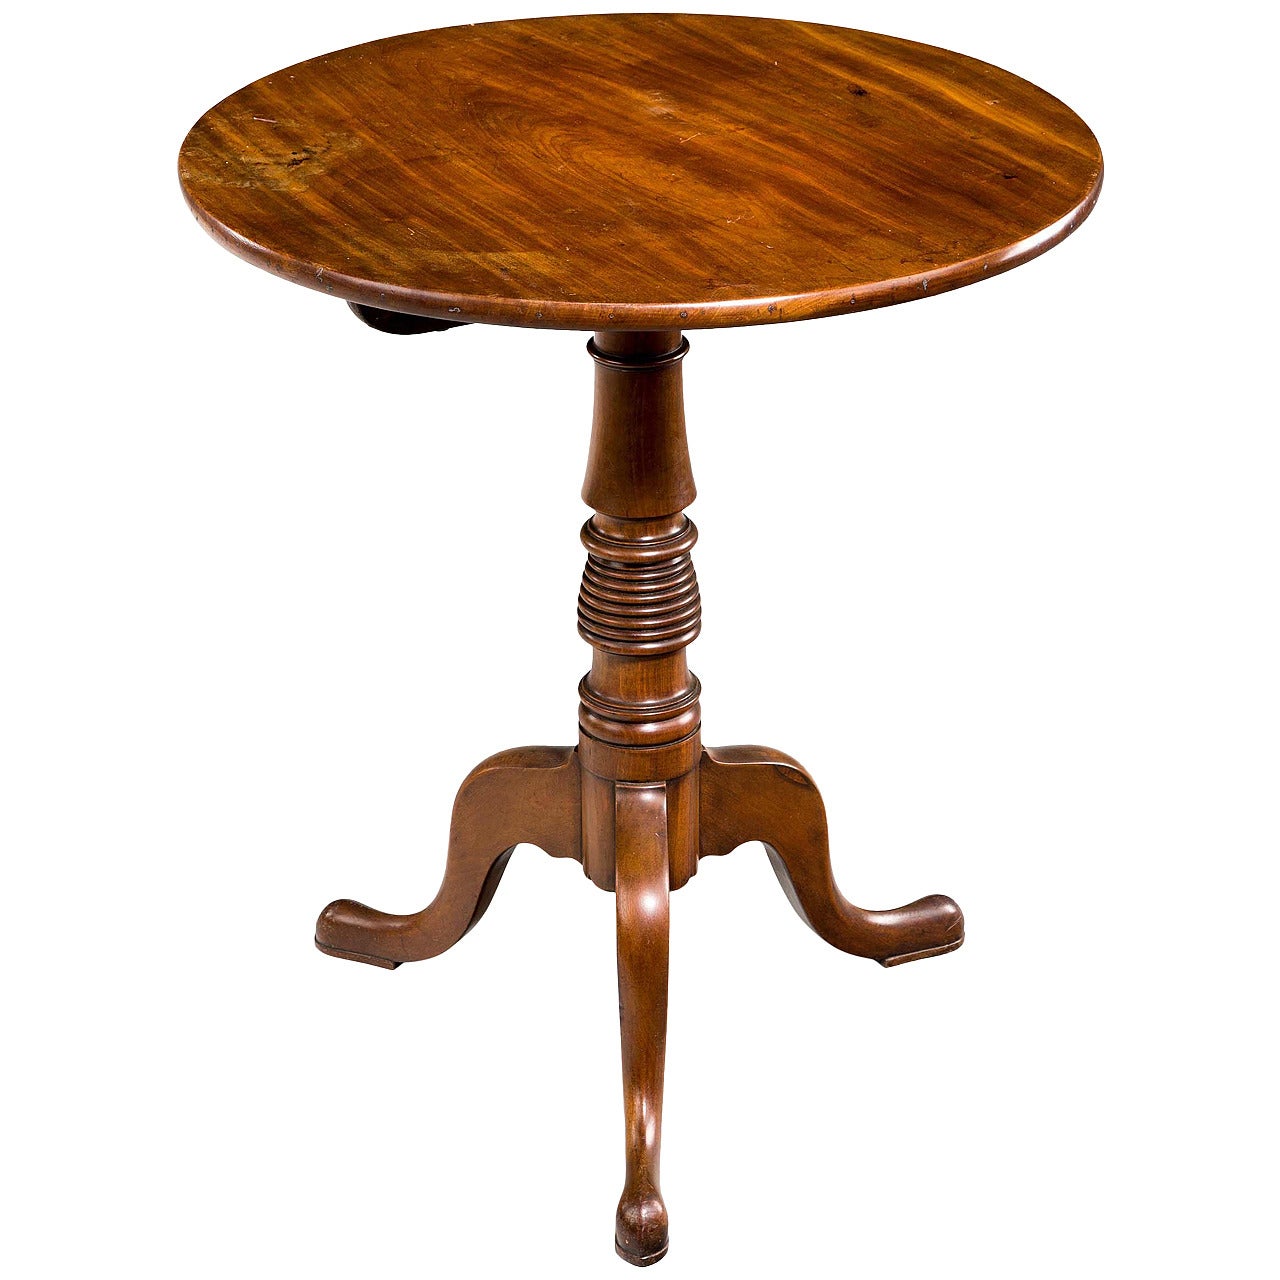 George III Period Mahogany Tilt Table with a Beehive Centre Section